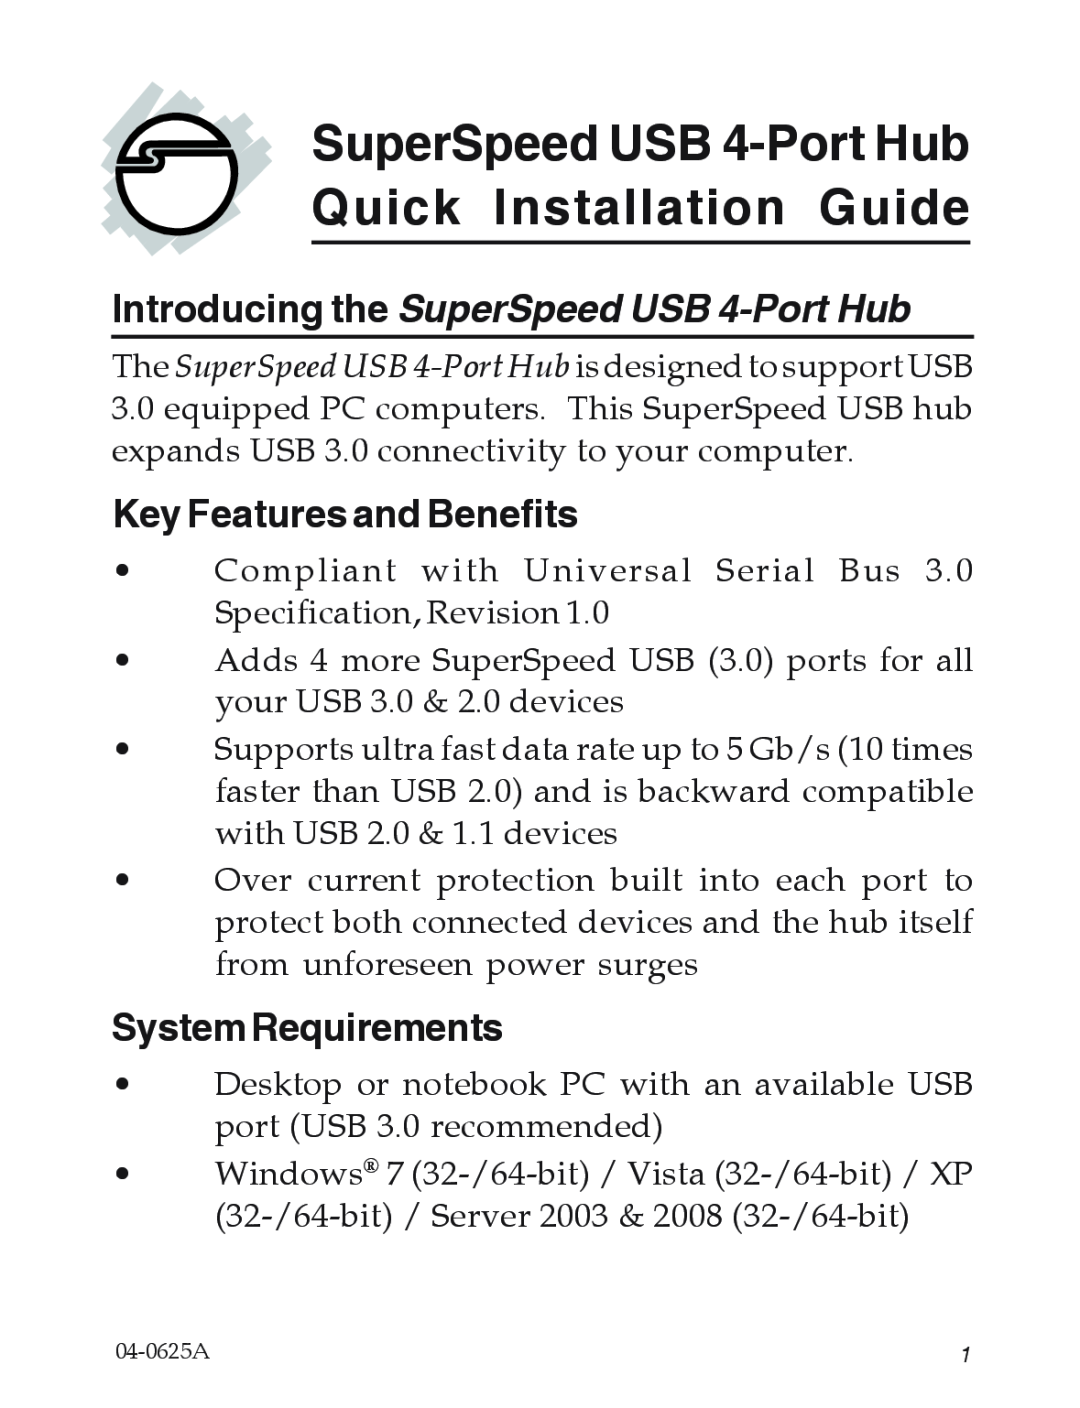 SIIG 04-0625A manual Key Features and Benefits, System Requirements, SuperSpeed USB 4-Port Hub Quick Installation Guide 